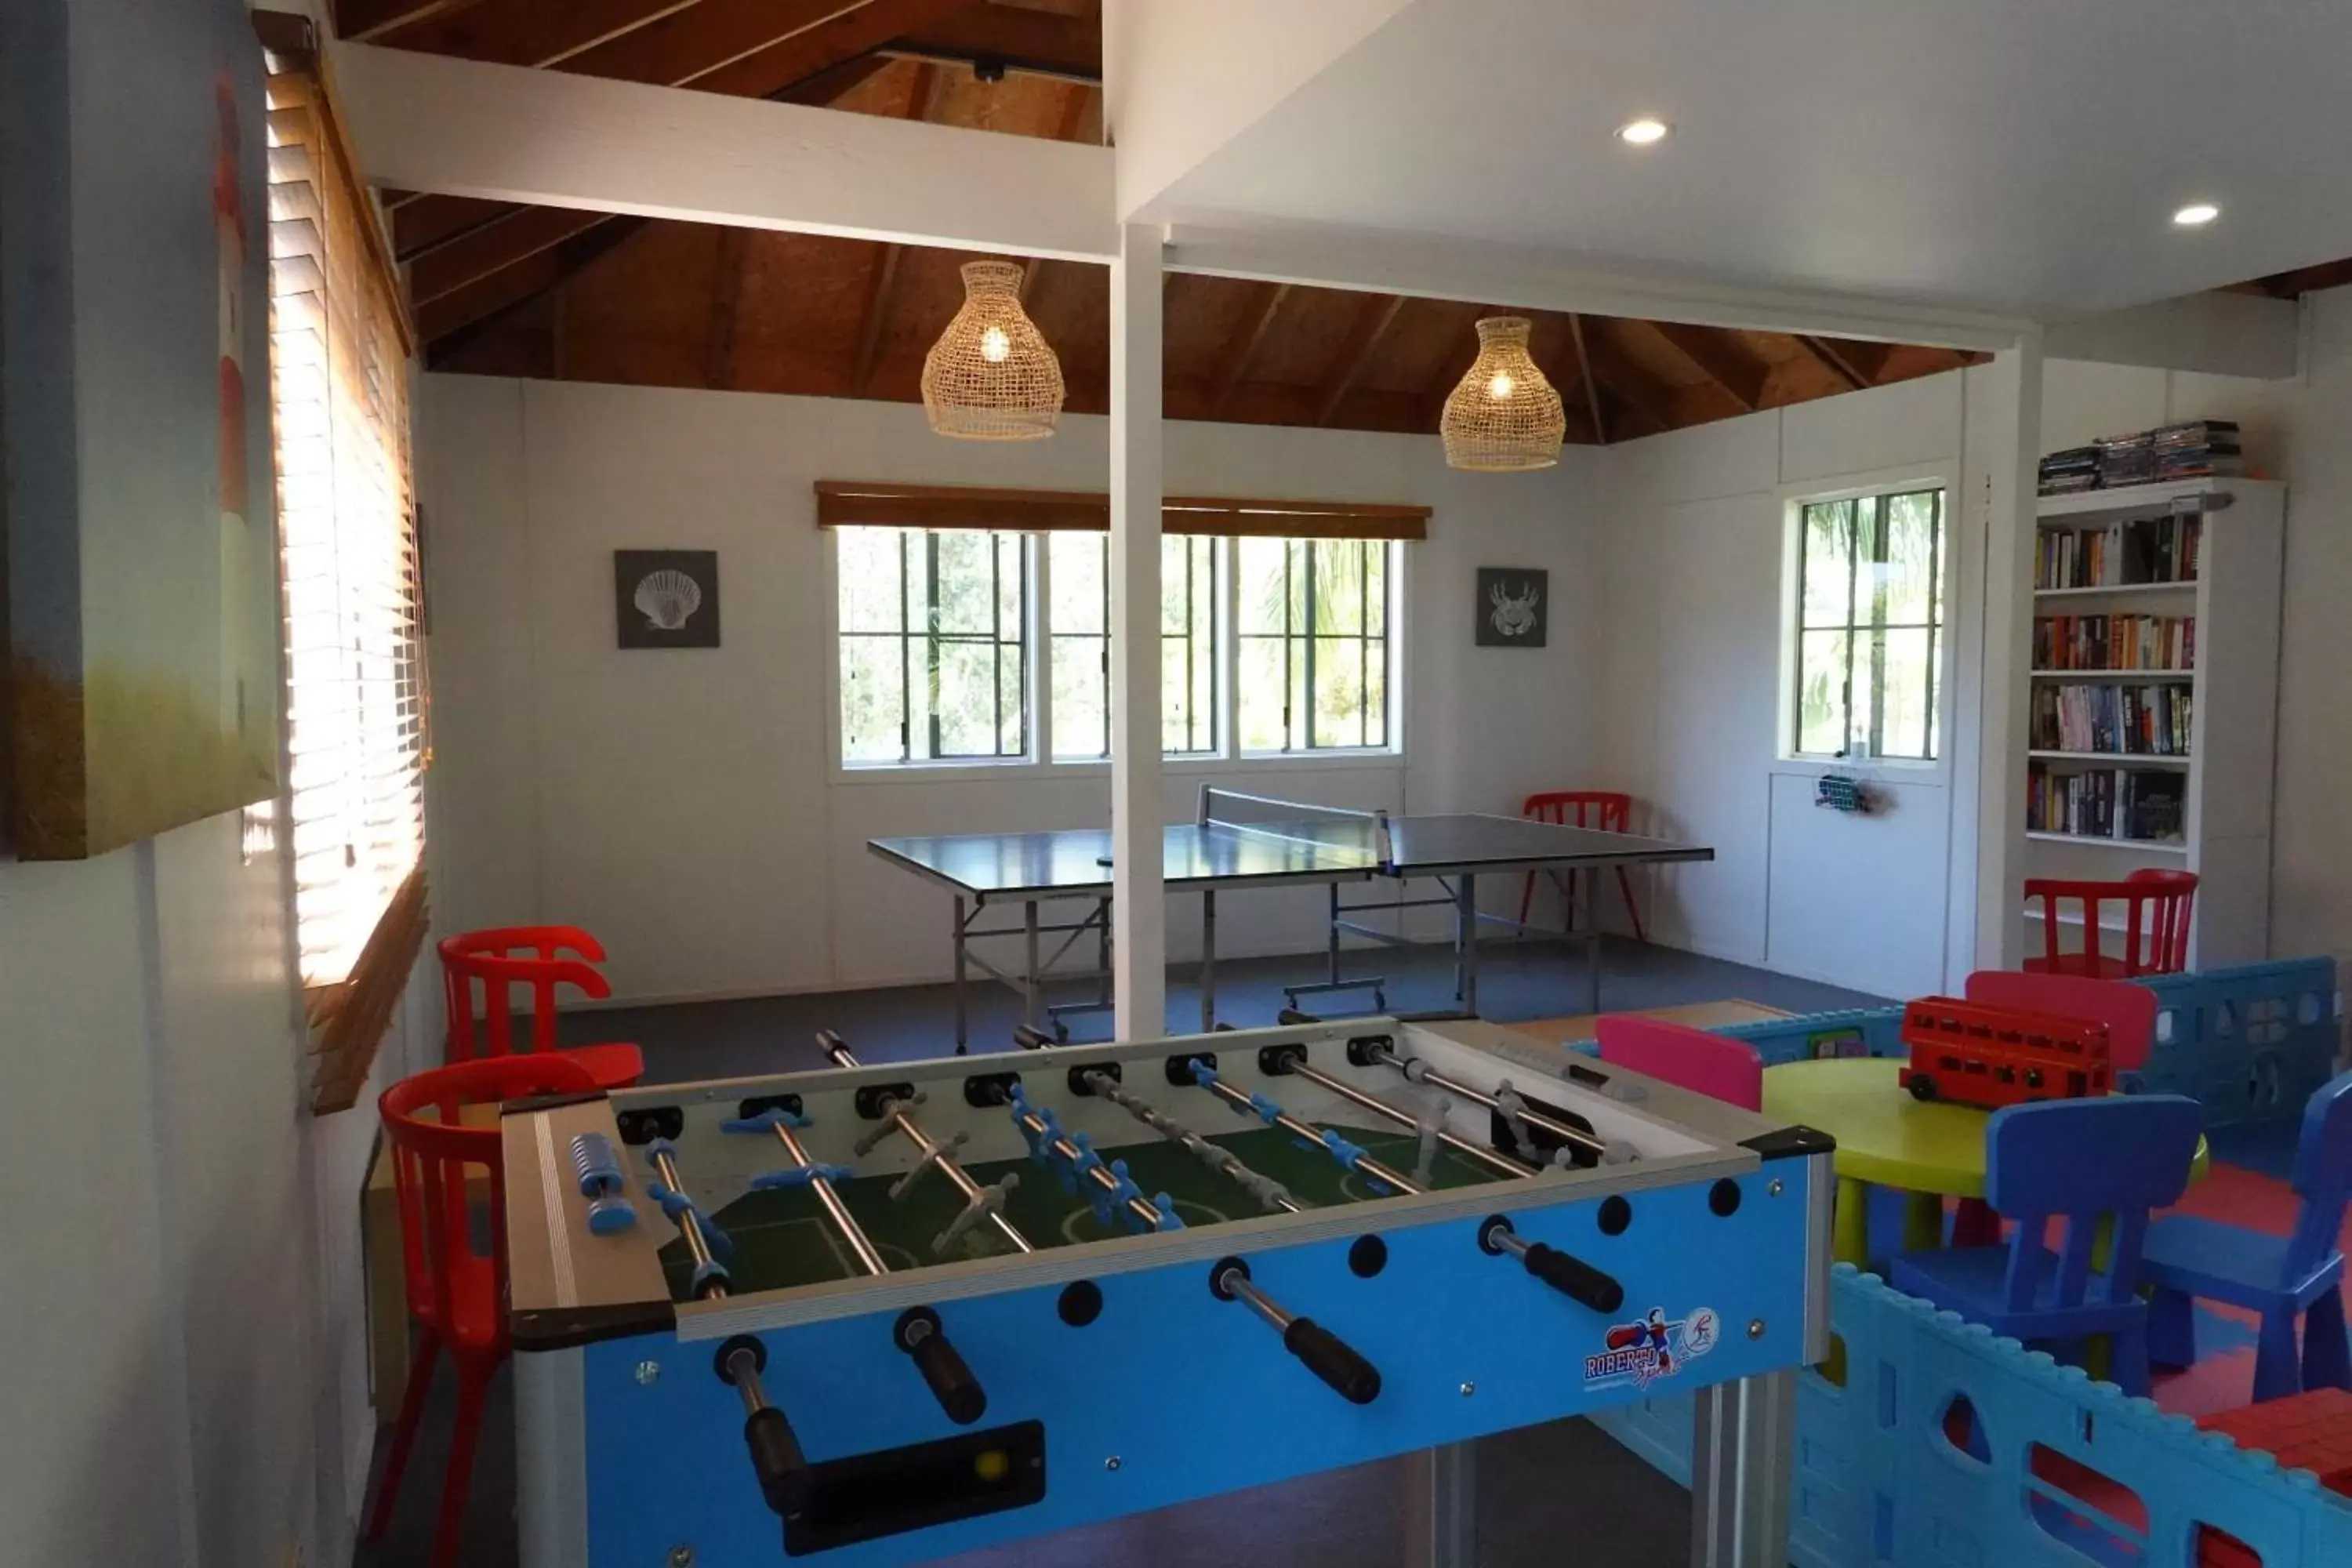 Game Room, Other Activities in The Oasis Apartments and Treetop Houses